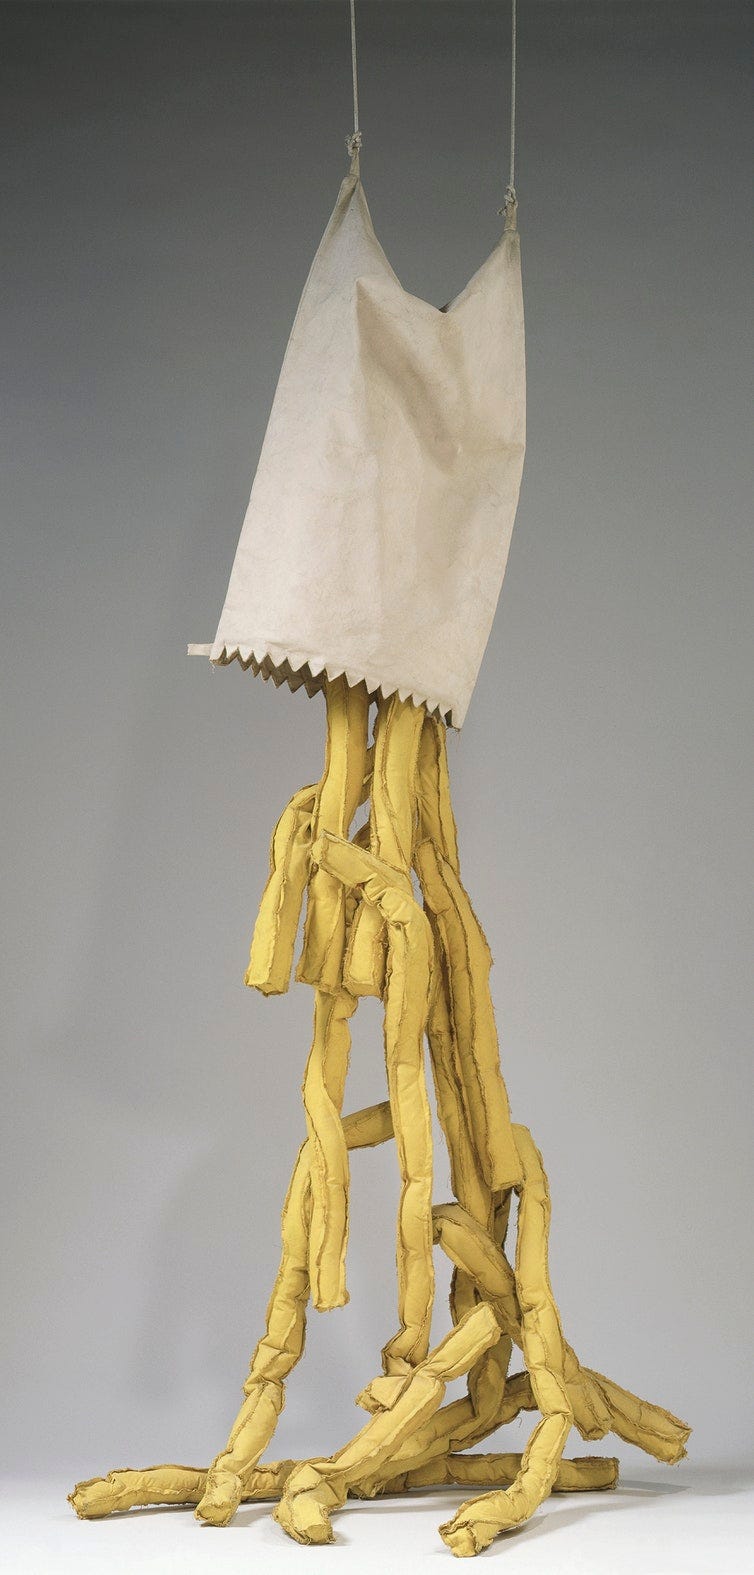 A rectangular cloth bag hangs with the mouth of the bag downwards, suspended by two cables. Long rectangular prisms ('fries') are falling from the bag's mouth. It looks like a drawing of a spilling paper bag of fries brought to life in massive scale.